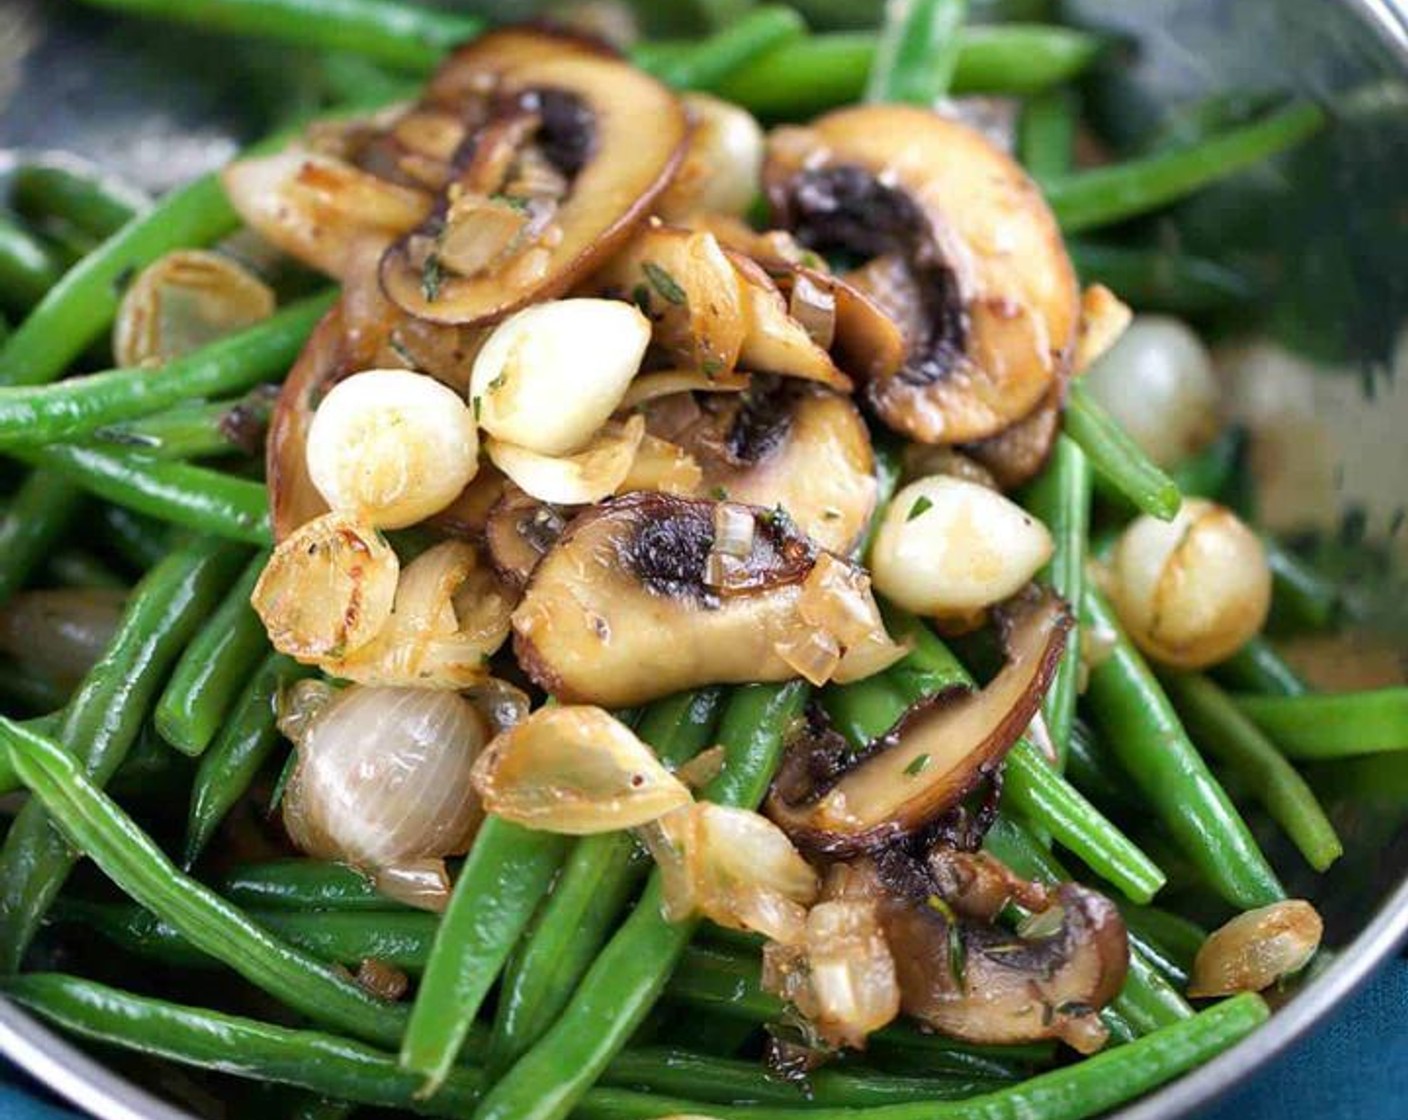 Haricot Verts with Mushrooms and Caramelized Onions